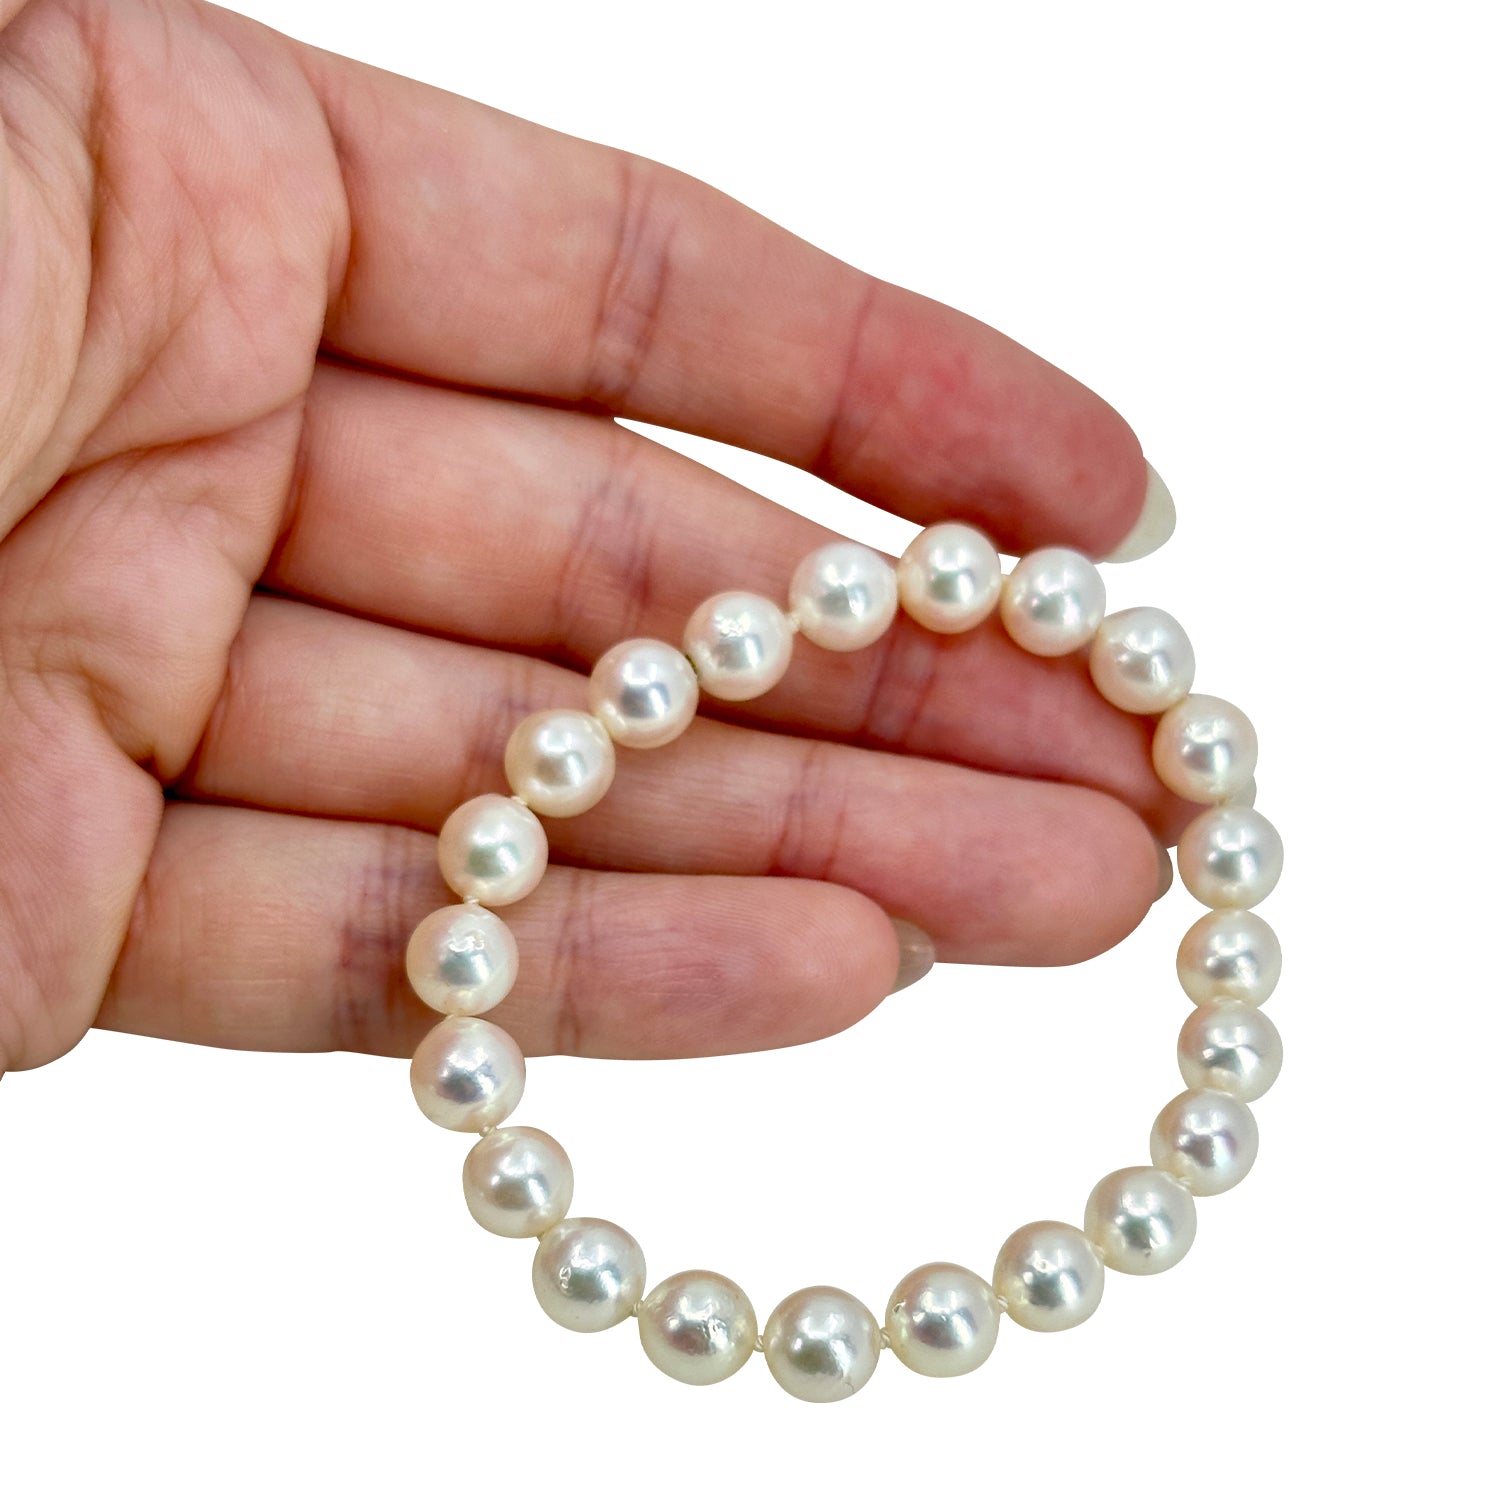 Invisible Hidden Clasp Japanese Saltwater Akoya Cultured Pearl Vintage Bracelet